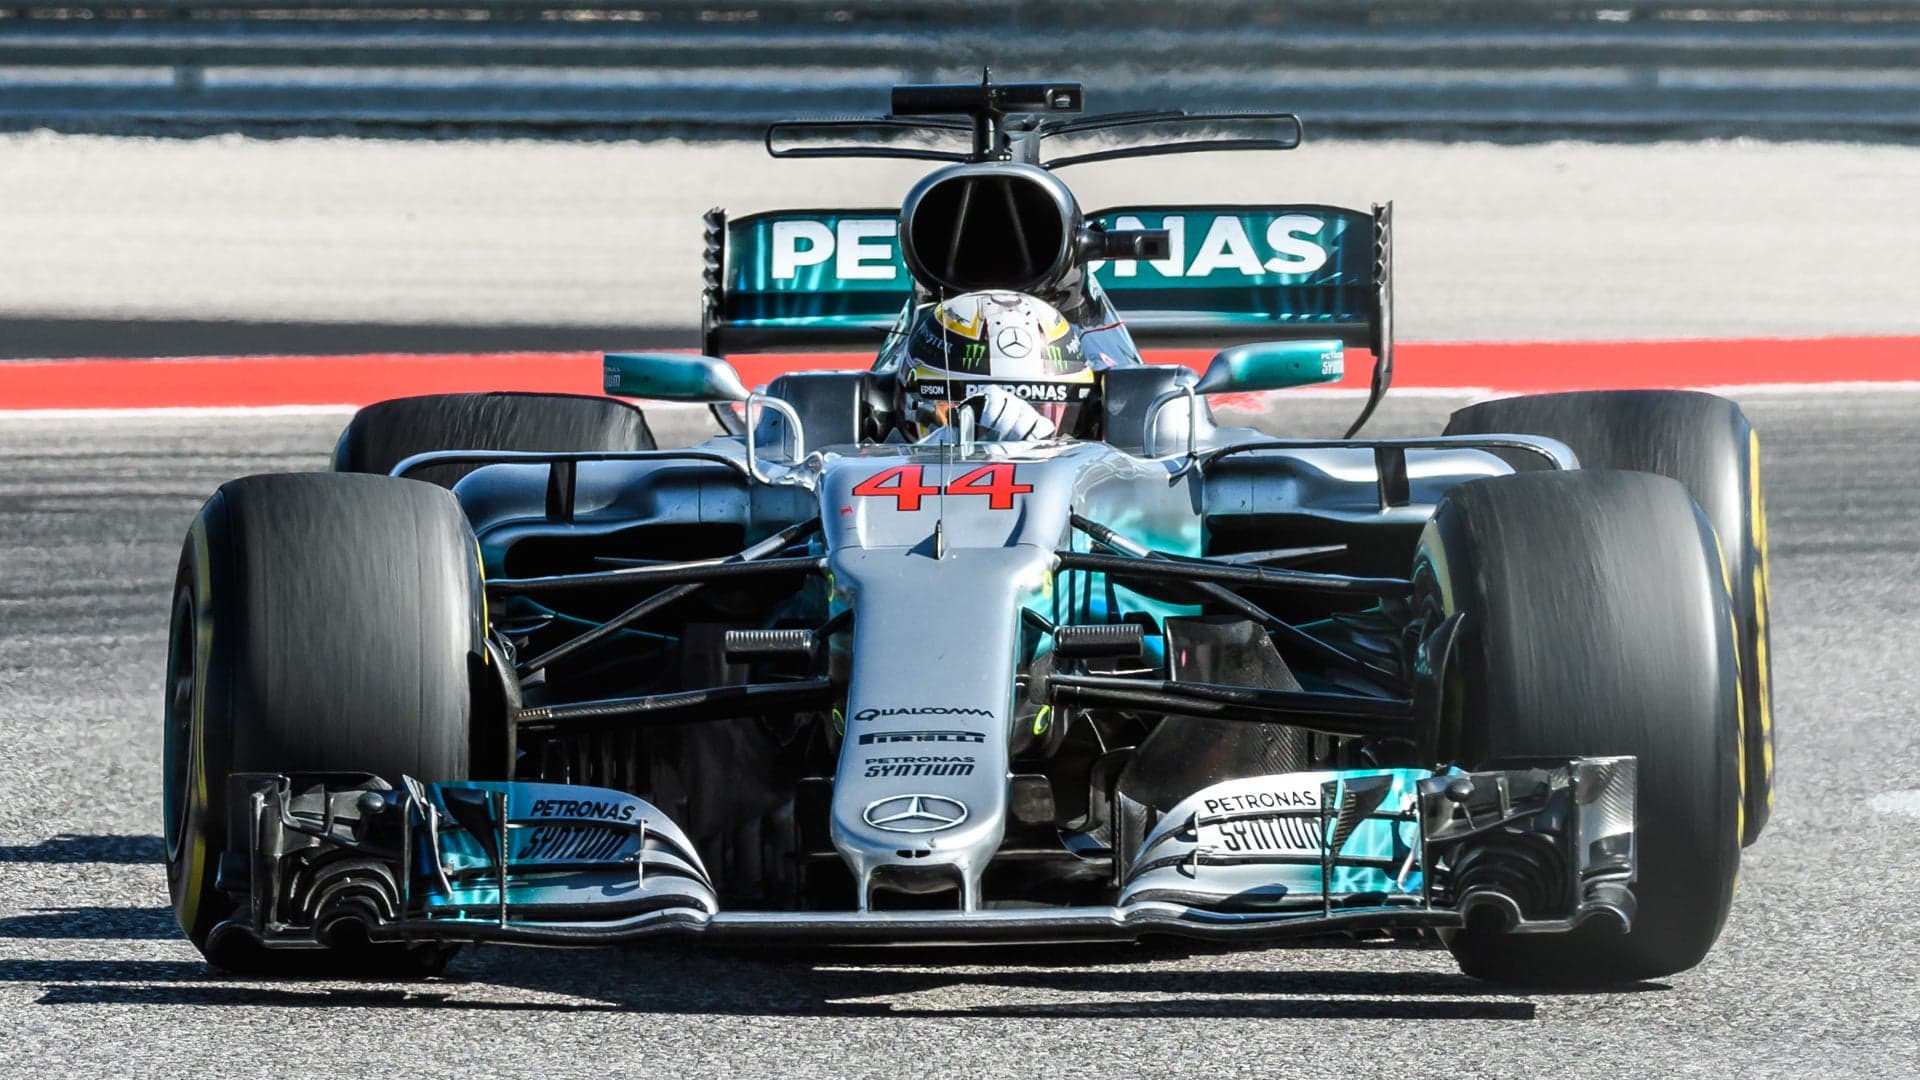 Hamilton Says ‘Hypersoft’ Compound Tire Is the Best Since Pirelli’s F1 Return